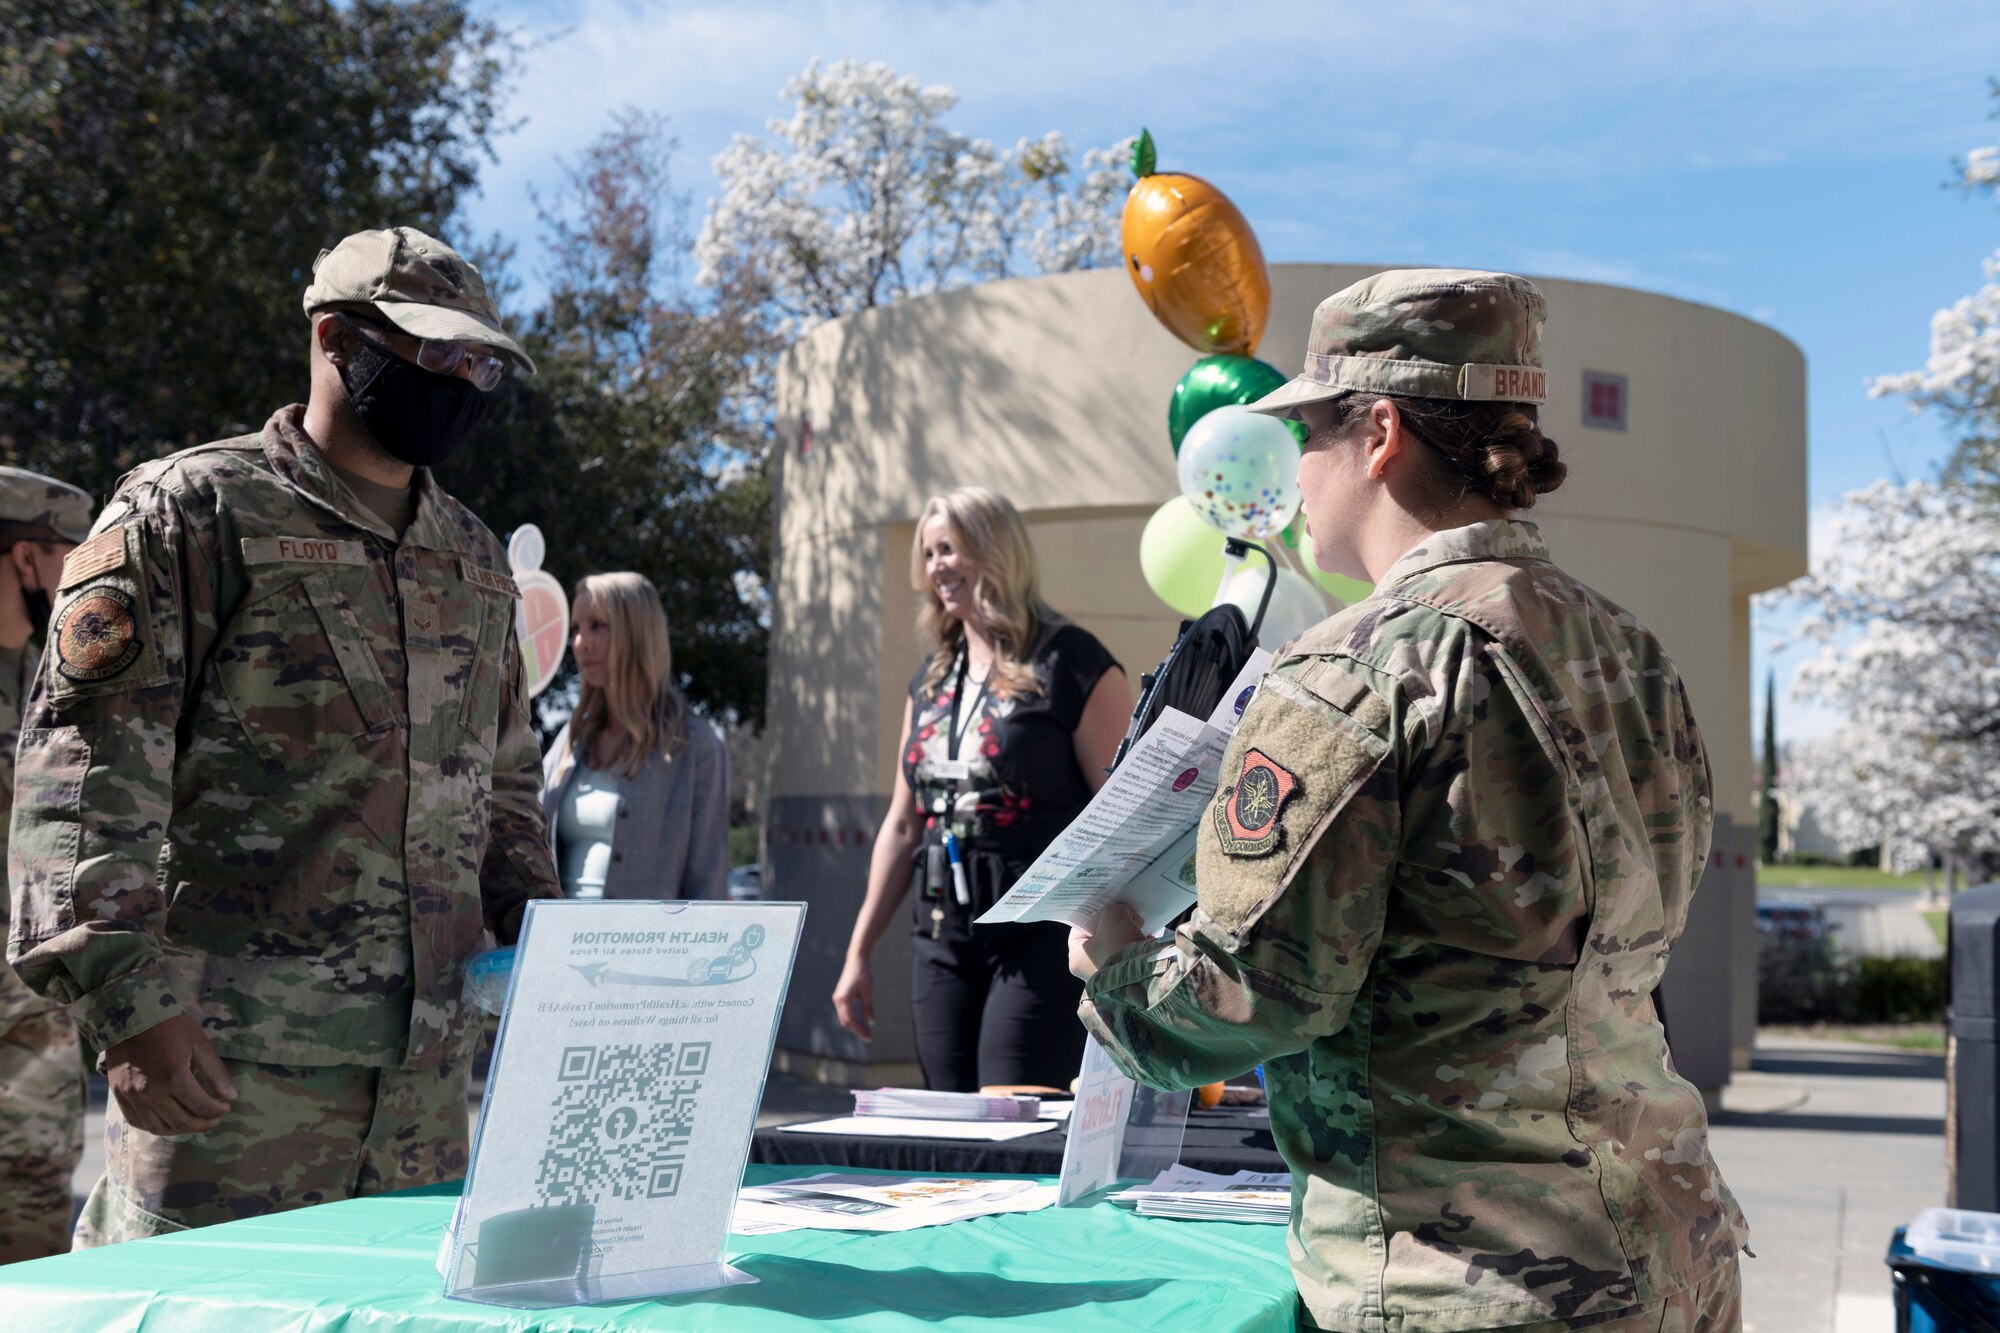 U.S. Air Force 1st Lt. Lauren Brandl, right, 60th Medical Group Outpatient Nutrition Clinic chief, briefs Airmen on the importance of healthy eating habits at Travis Air Force Base, California, March 1, 2022. To push this years’ theme ‘Celebrating a World of Flavors,’ the 60th Medical Group Nutritional Medicine outpatient nutrition clinic and Health Promotion Services have partnered together for multiple events across the base, highlighting March as National Nutrition Month. (U.S. Air Force photo by Senior Airman Jonathon Carnell)